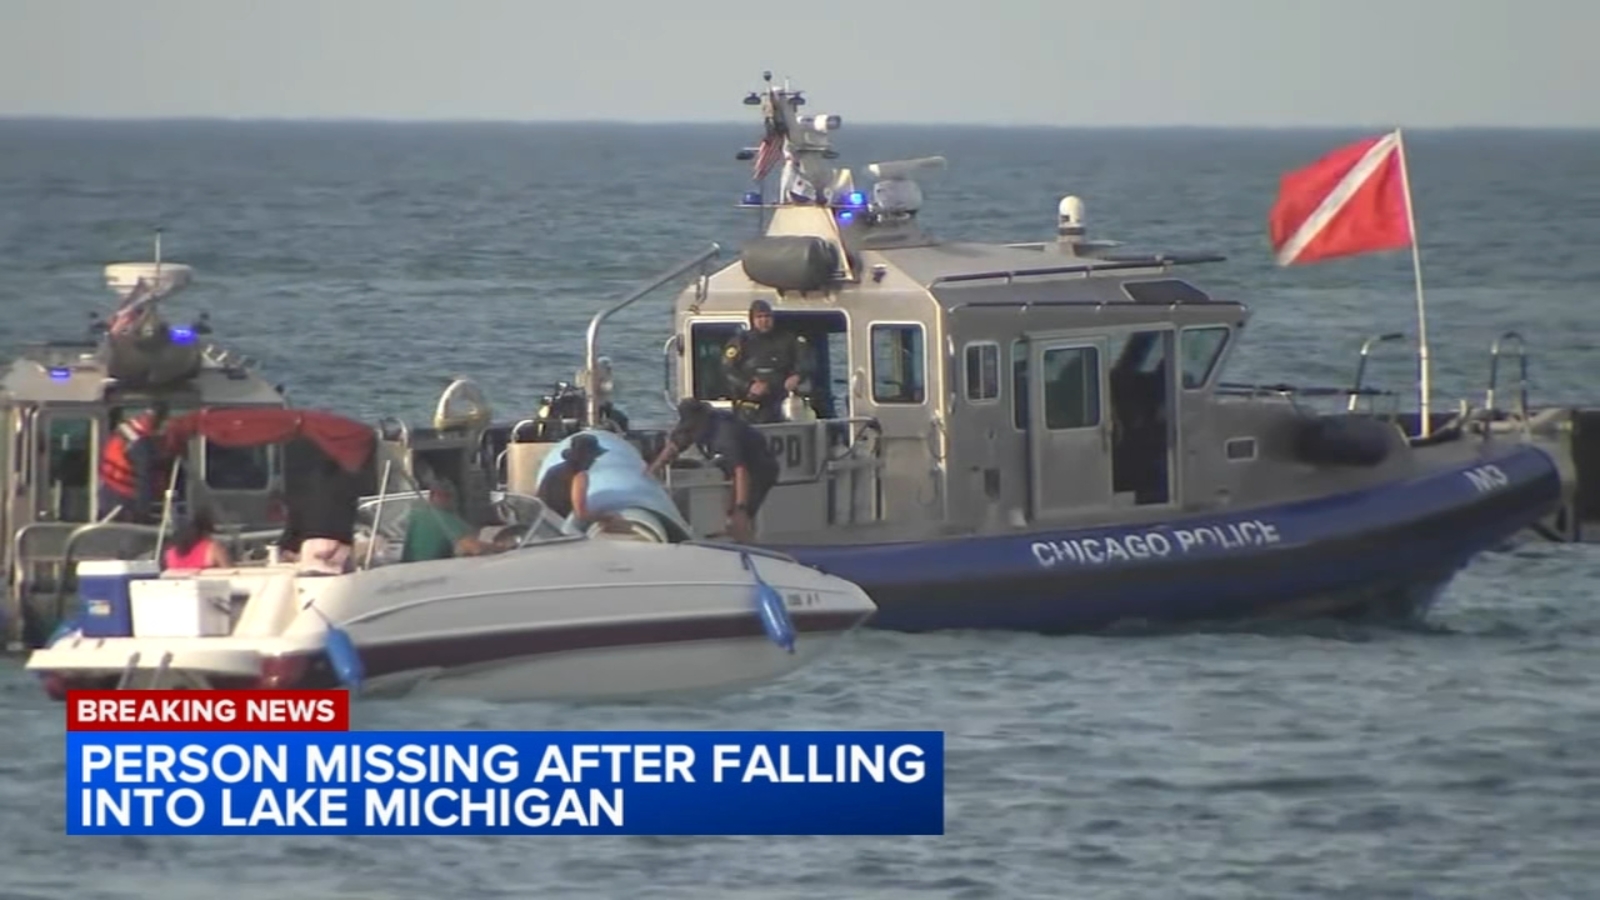 Person falls off boat at Chicago ‘Playpen,’ crews suspend water search in Lake Michigan, authorities say [Video]